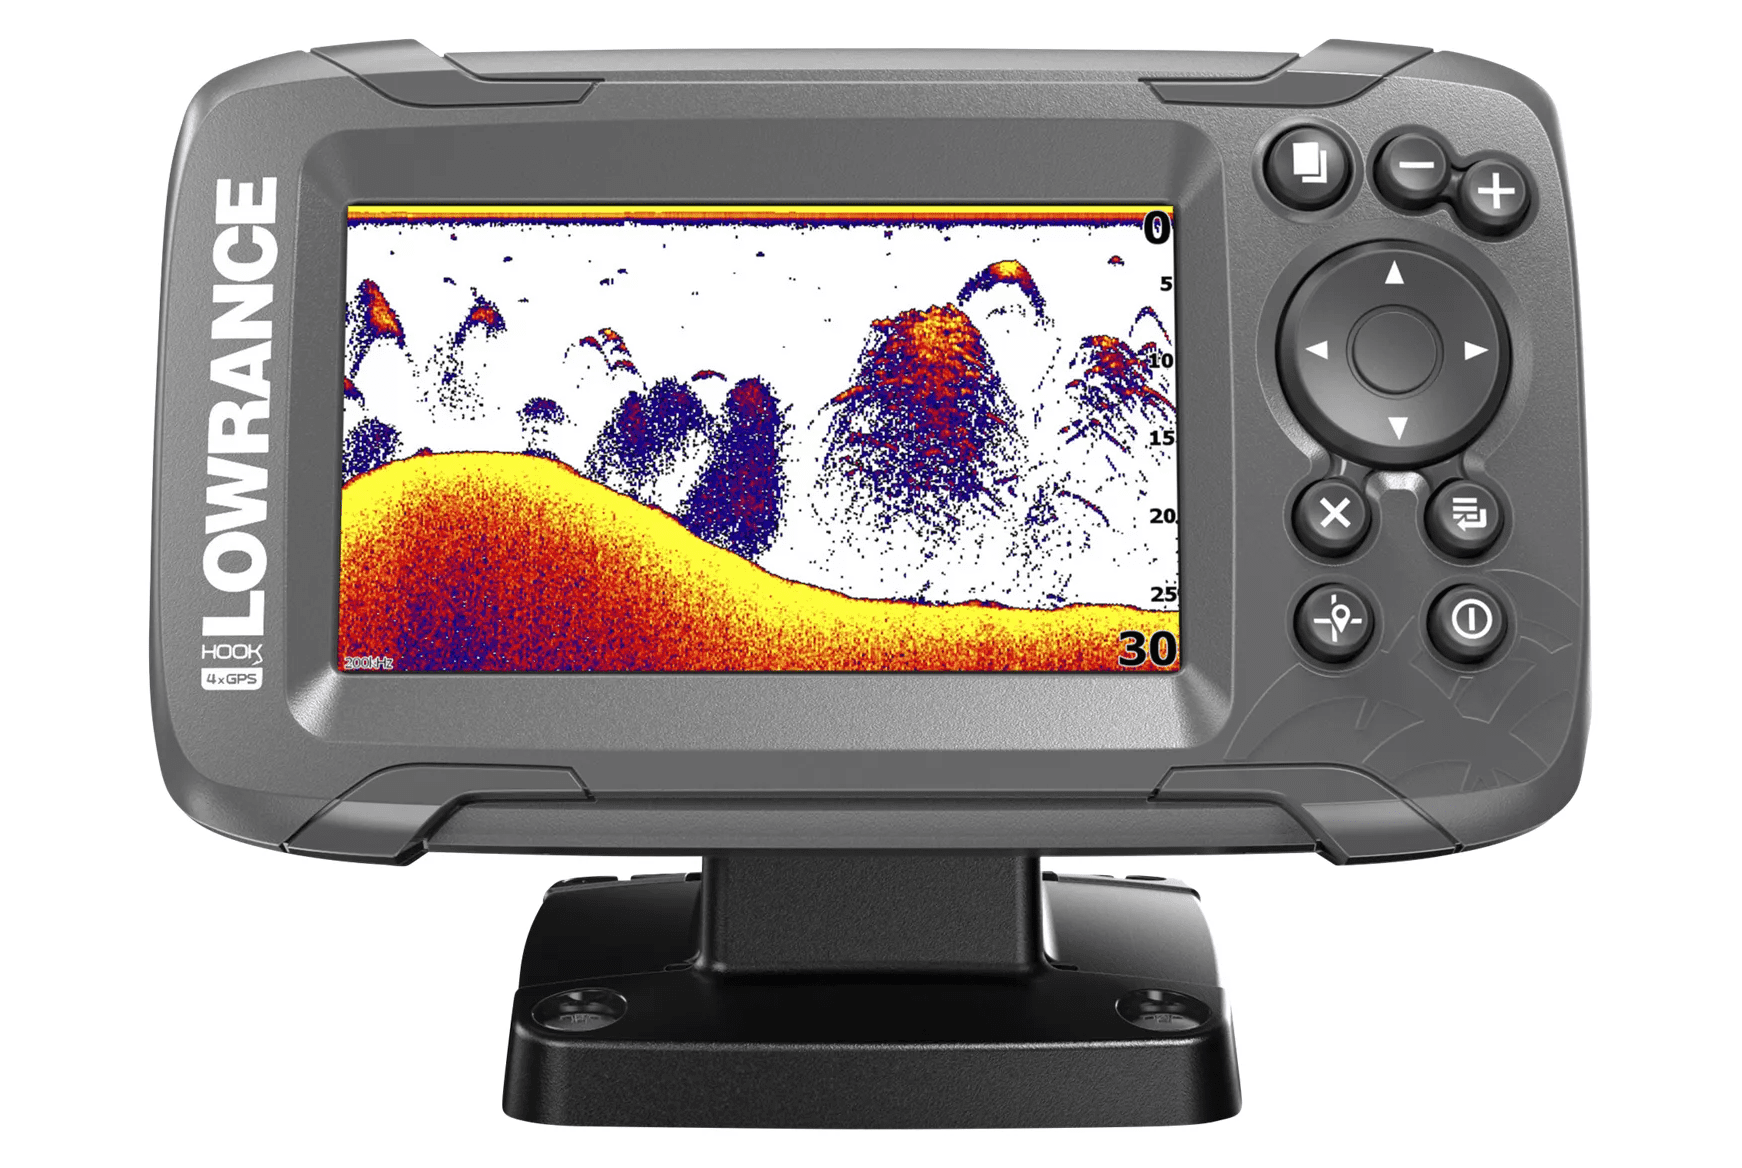 Lowrance HOOK2-4x GPS Fish Finder with Bullet Transducer